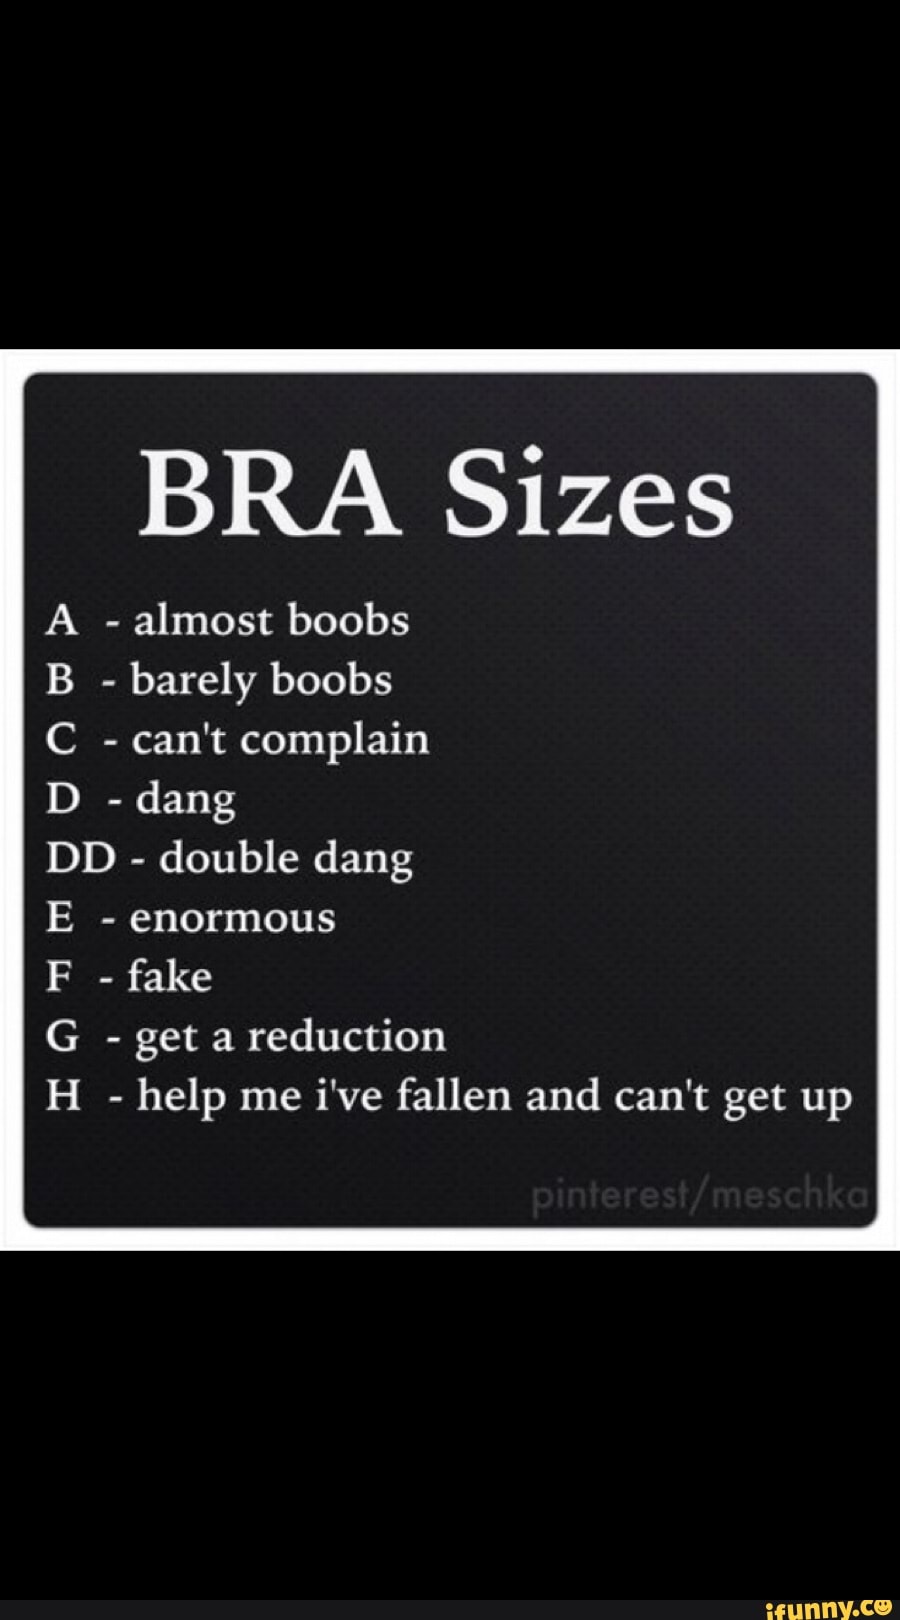 BRA Sizes A almost boobs B barely boobs C can't complain D dang DD